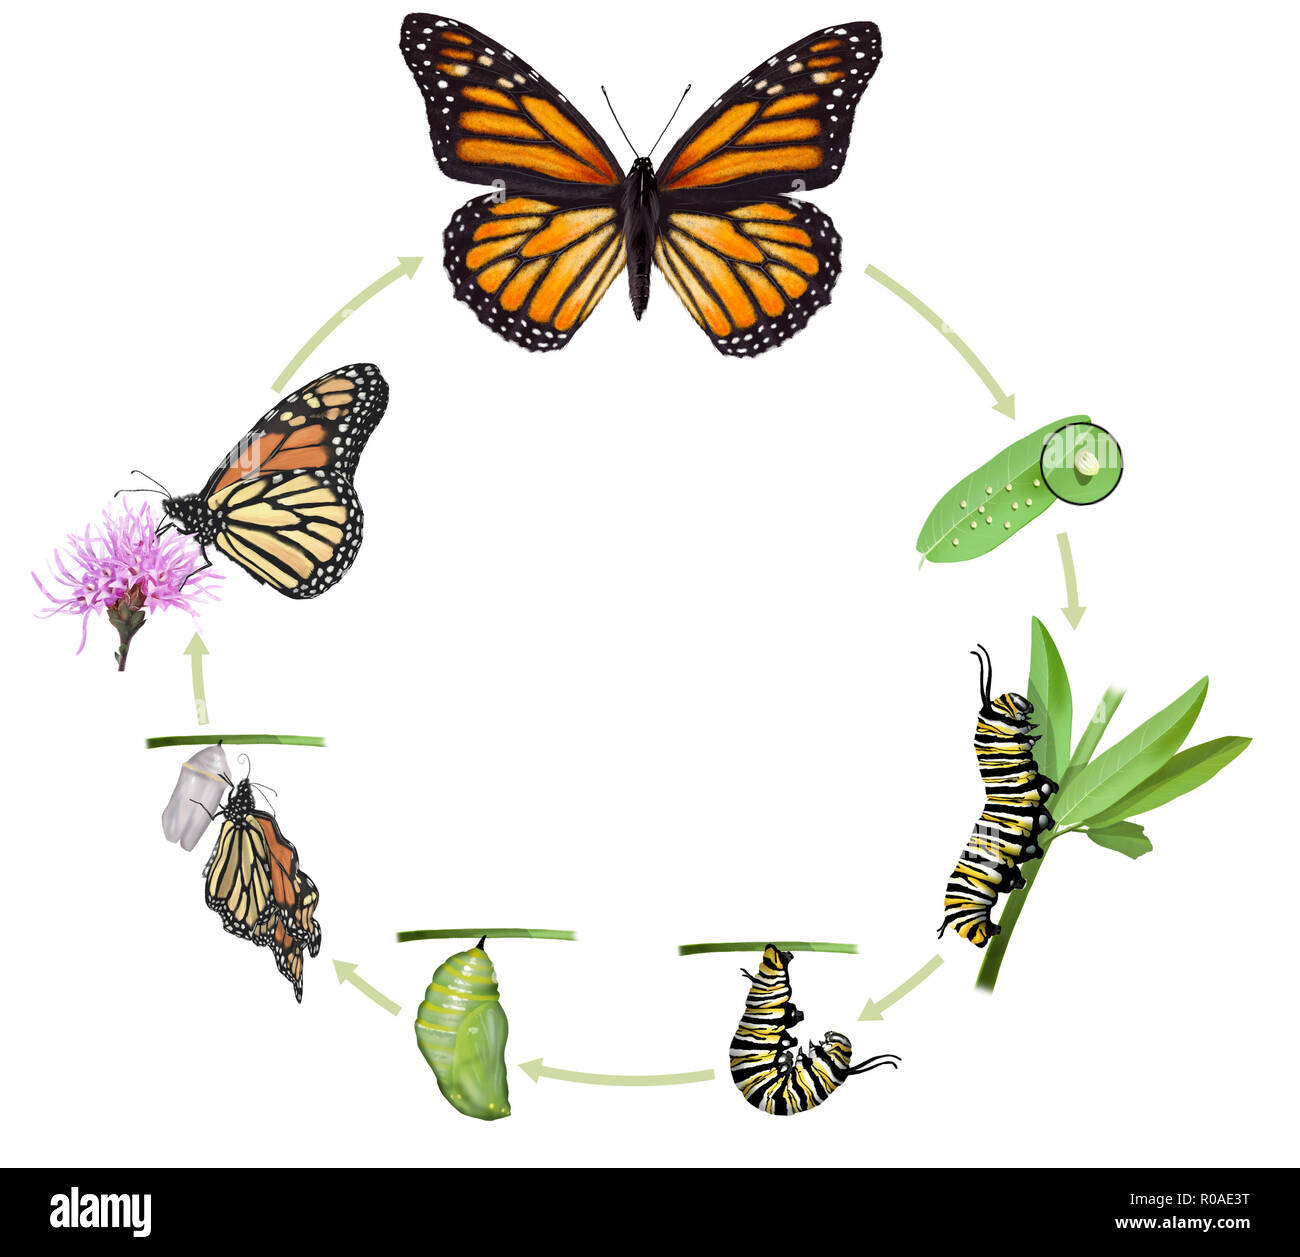 Digital illustration of a monarch butterfly life cycle Stock Photo